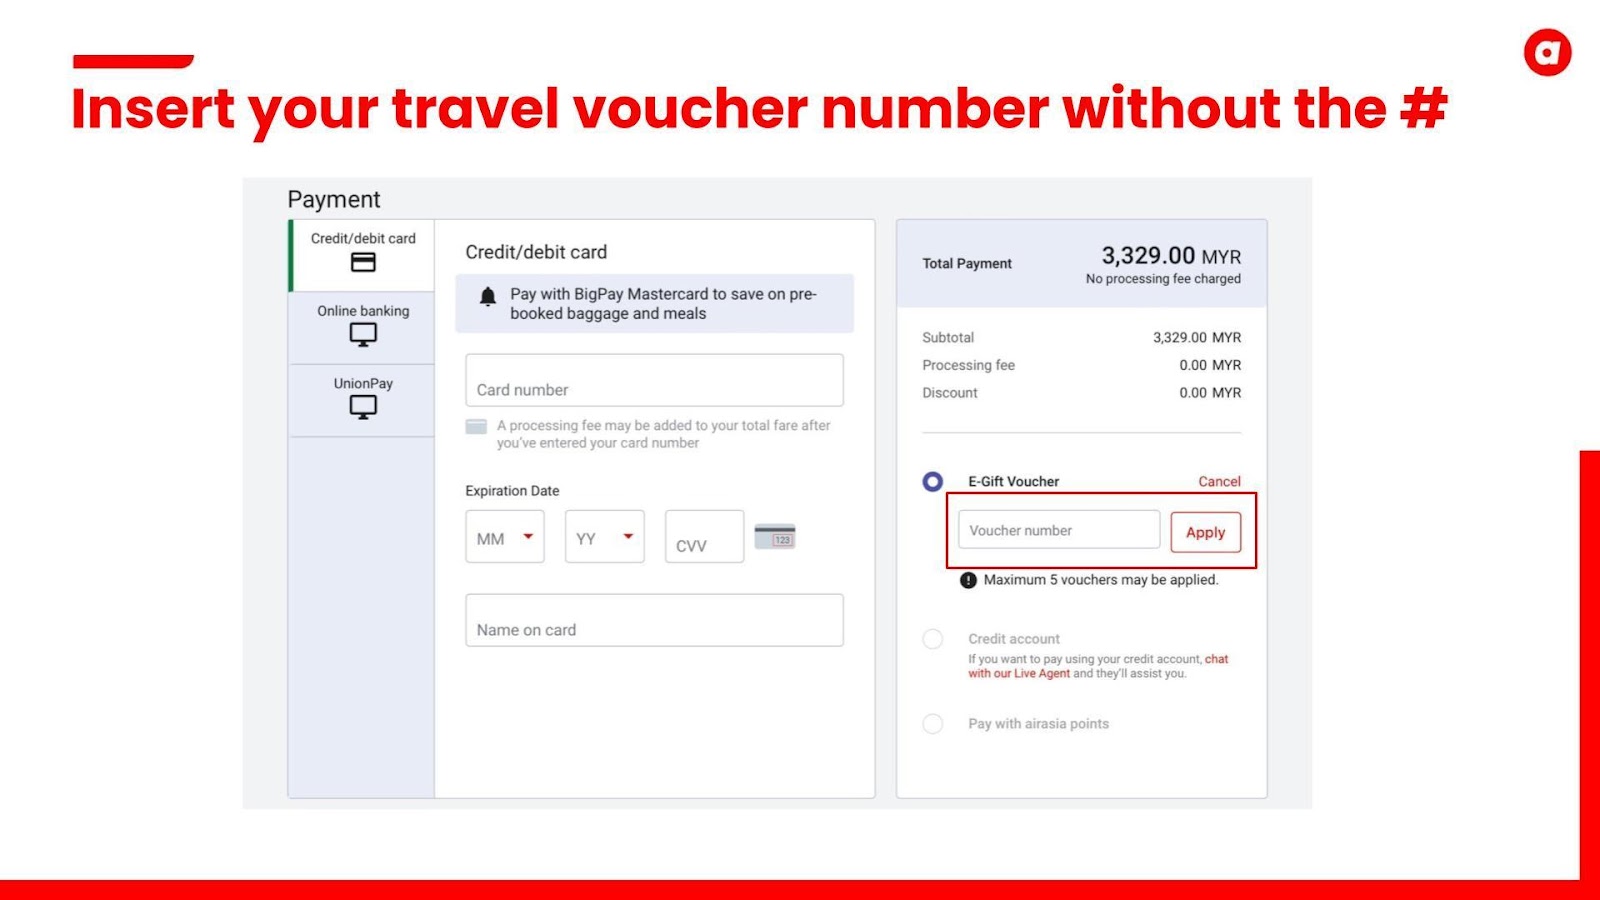 Live chat x airasia CCI approves